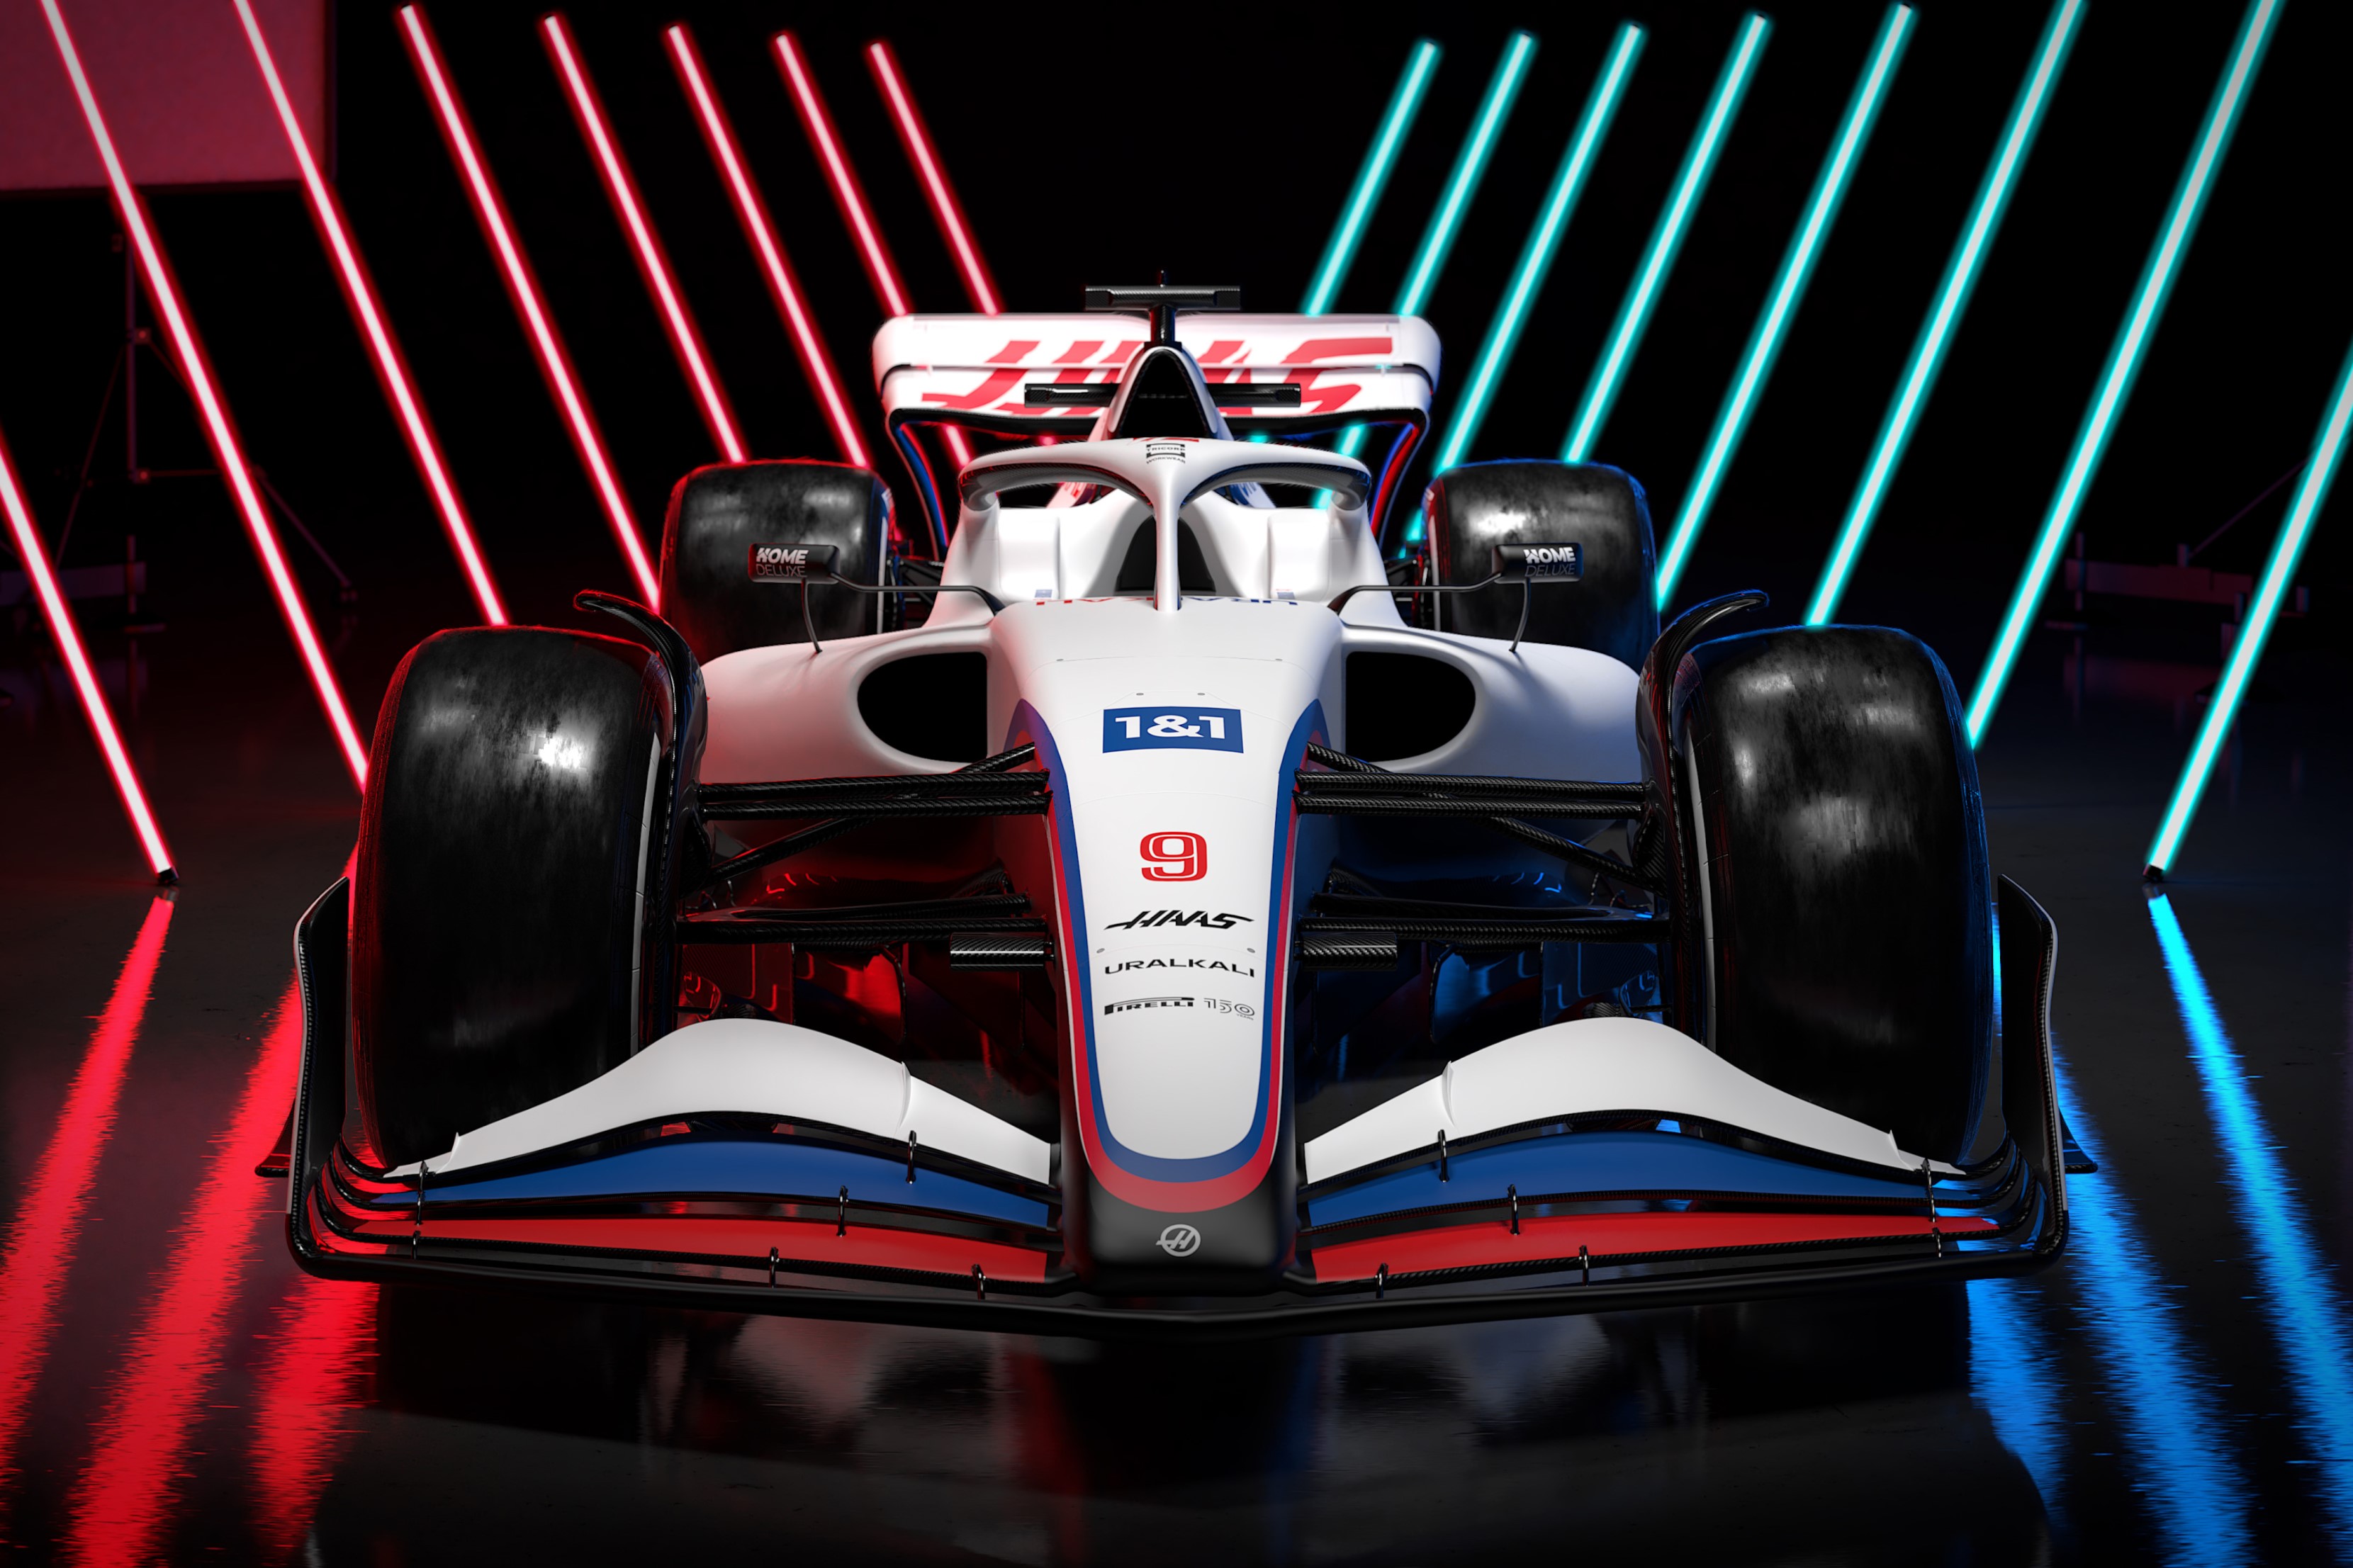 Gary Anderson: What Haas image tell us about 2022 F1 cars